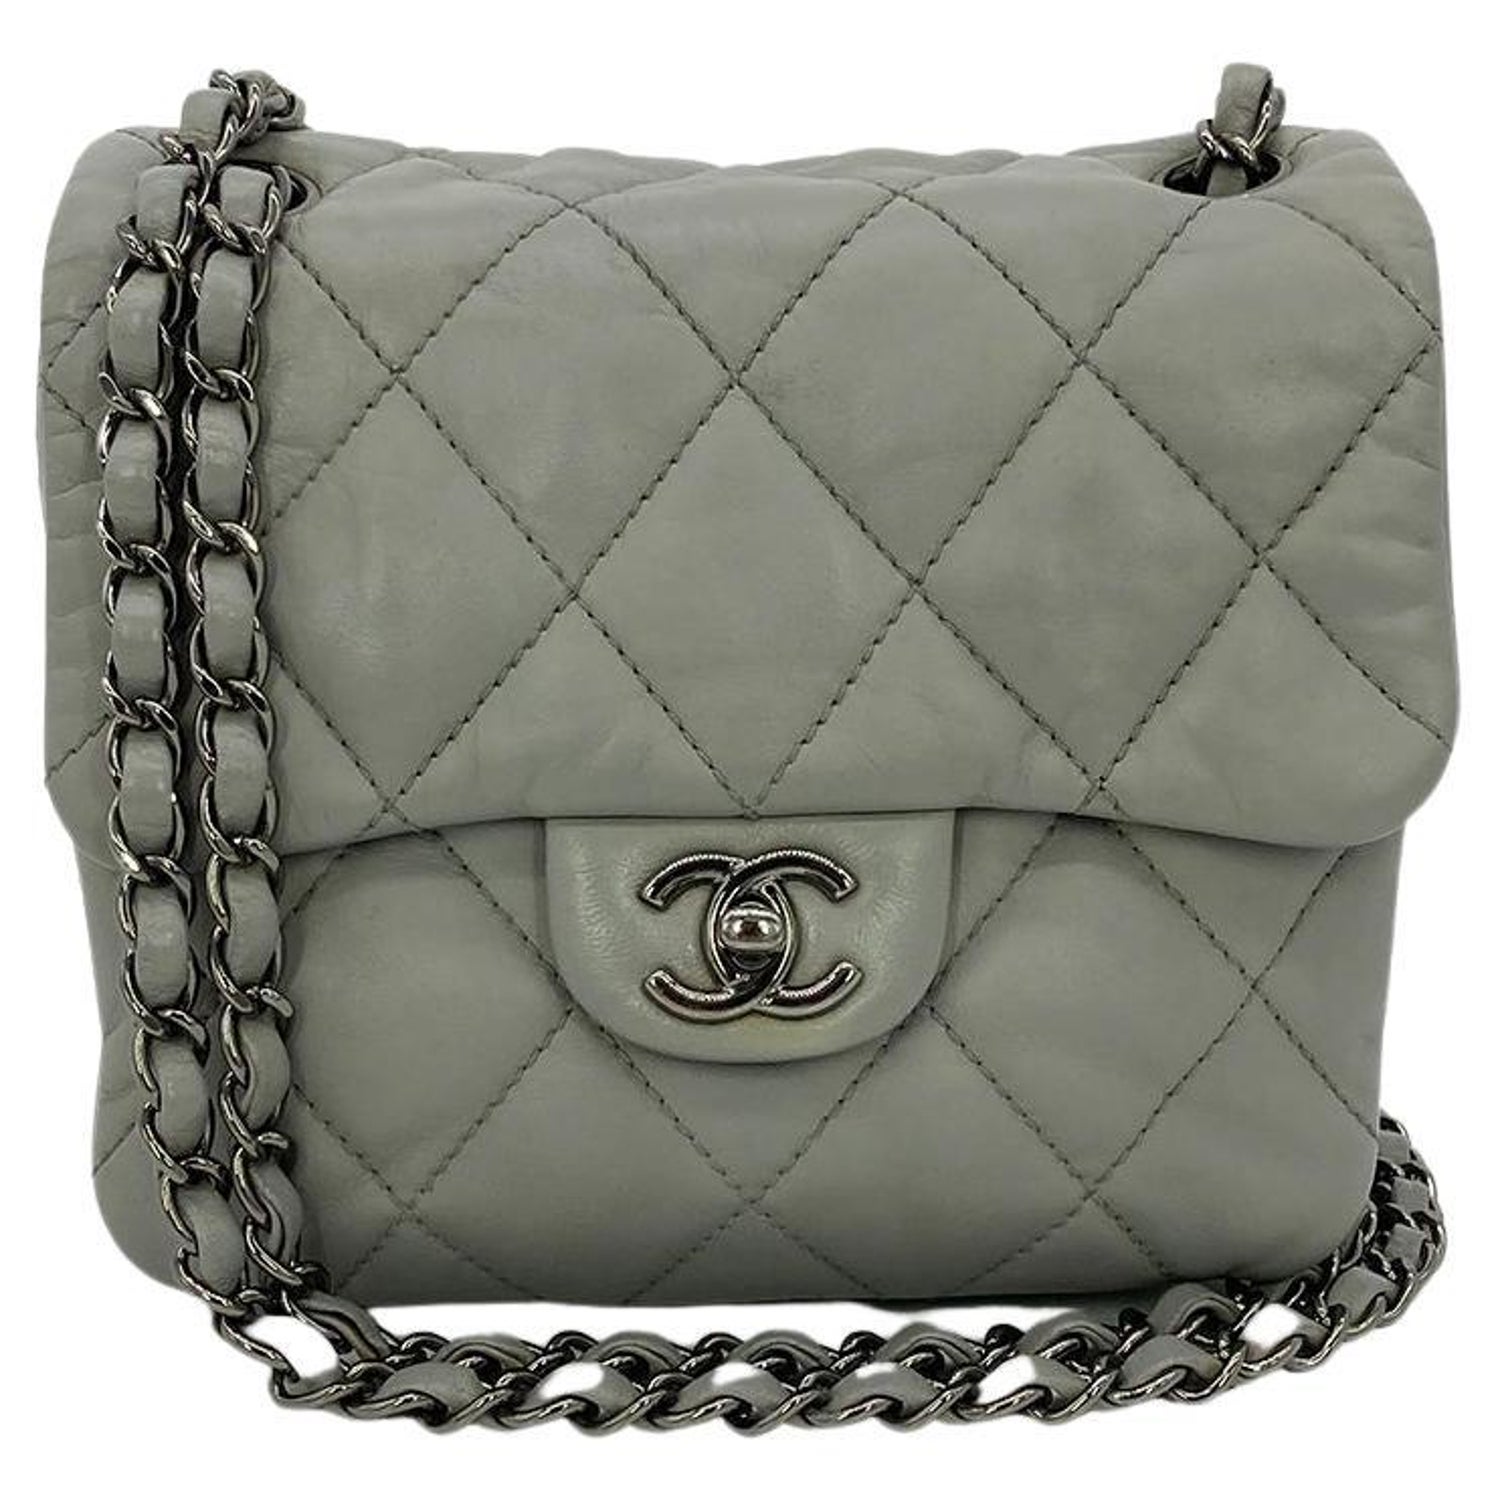 Chanel Lime Green Butterfly Classic Flap Bag – Ladybag International